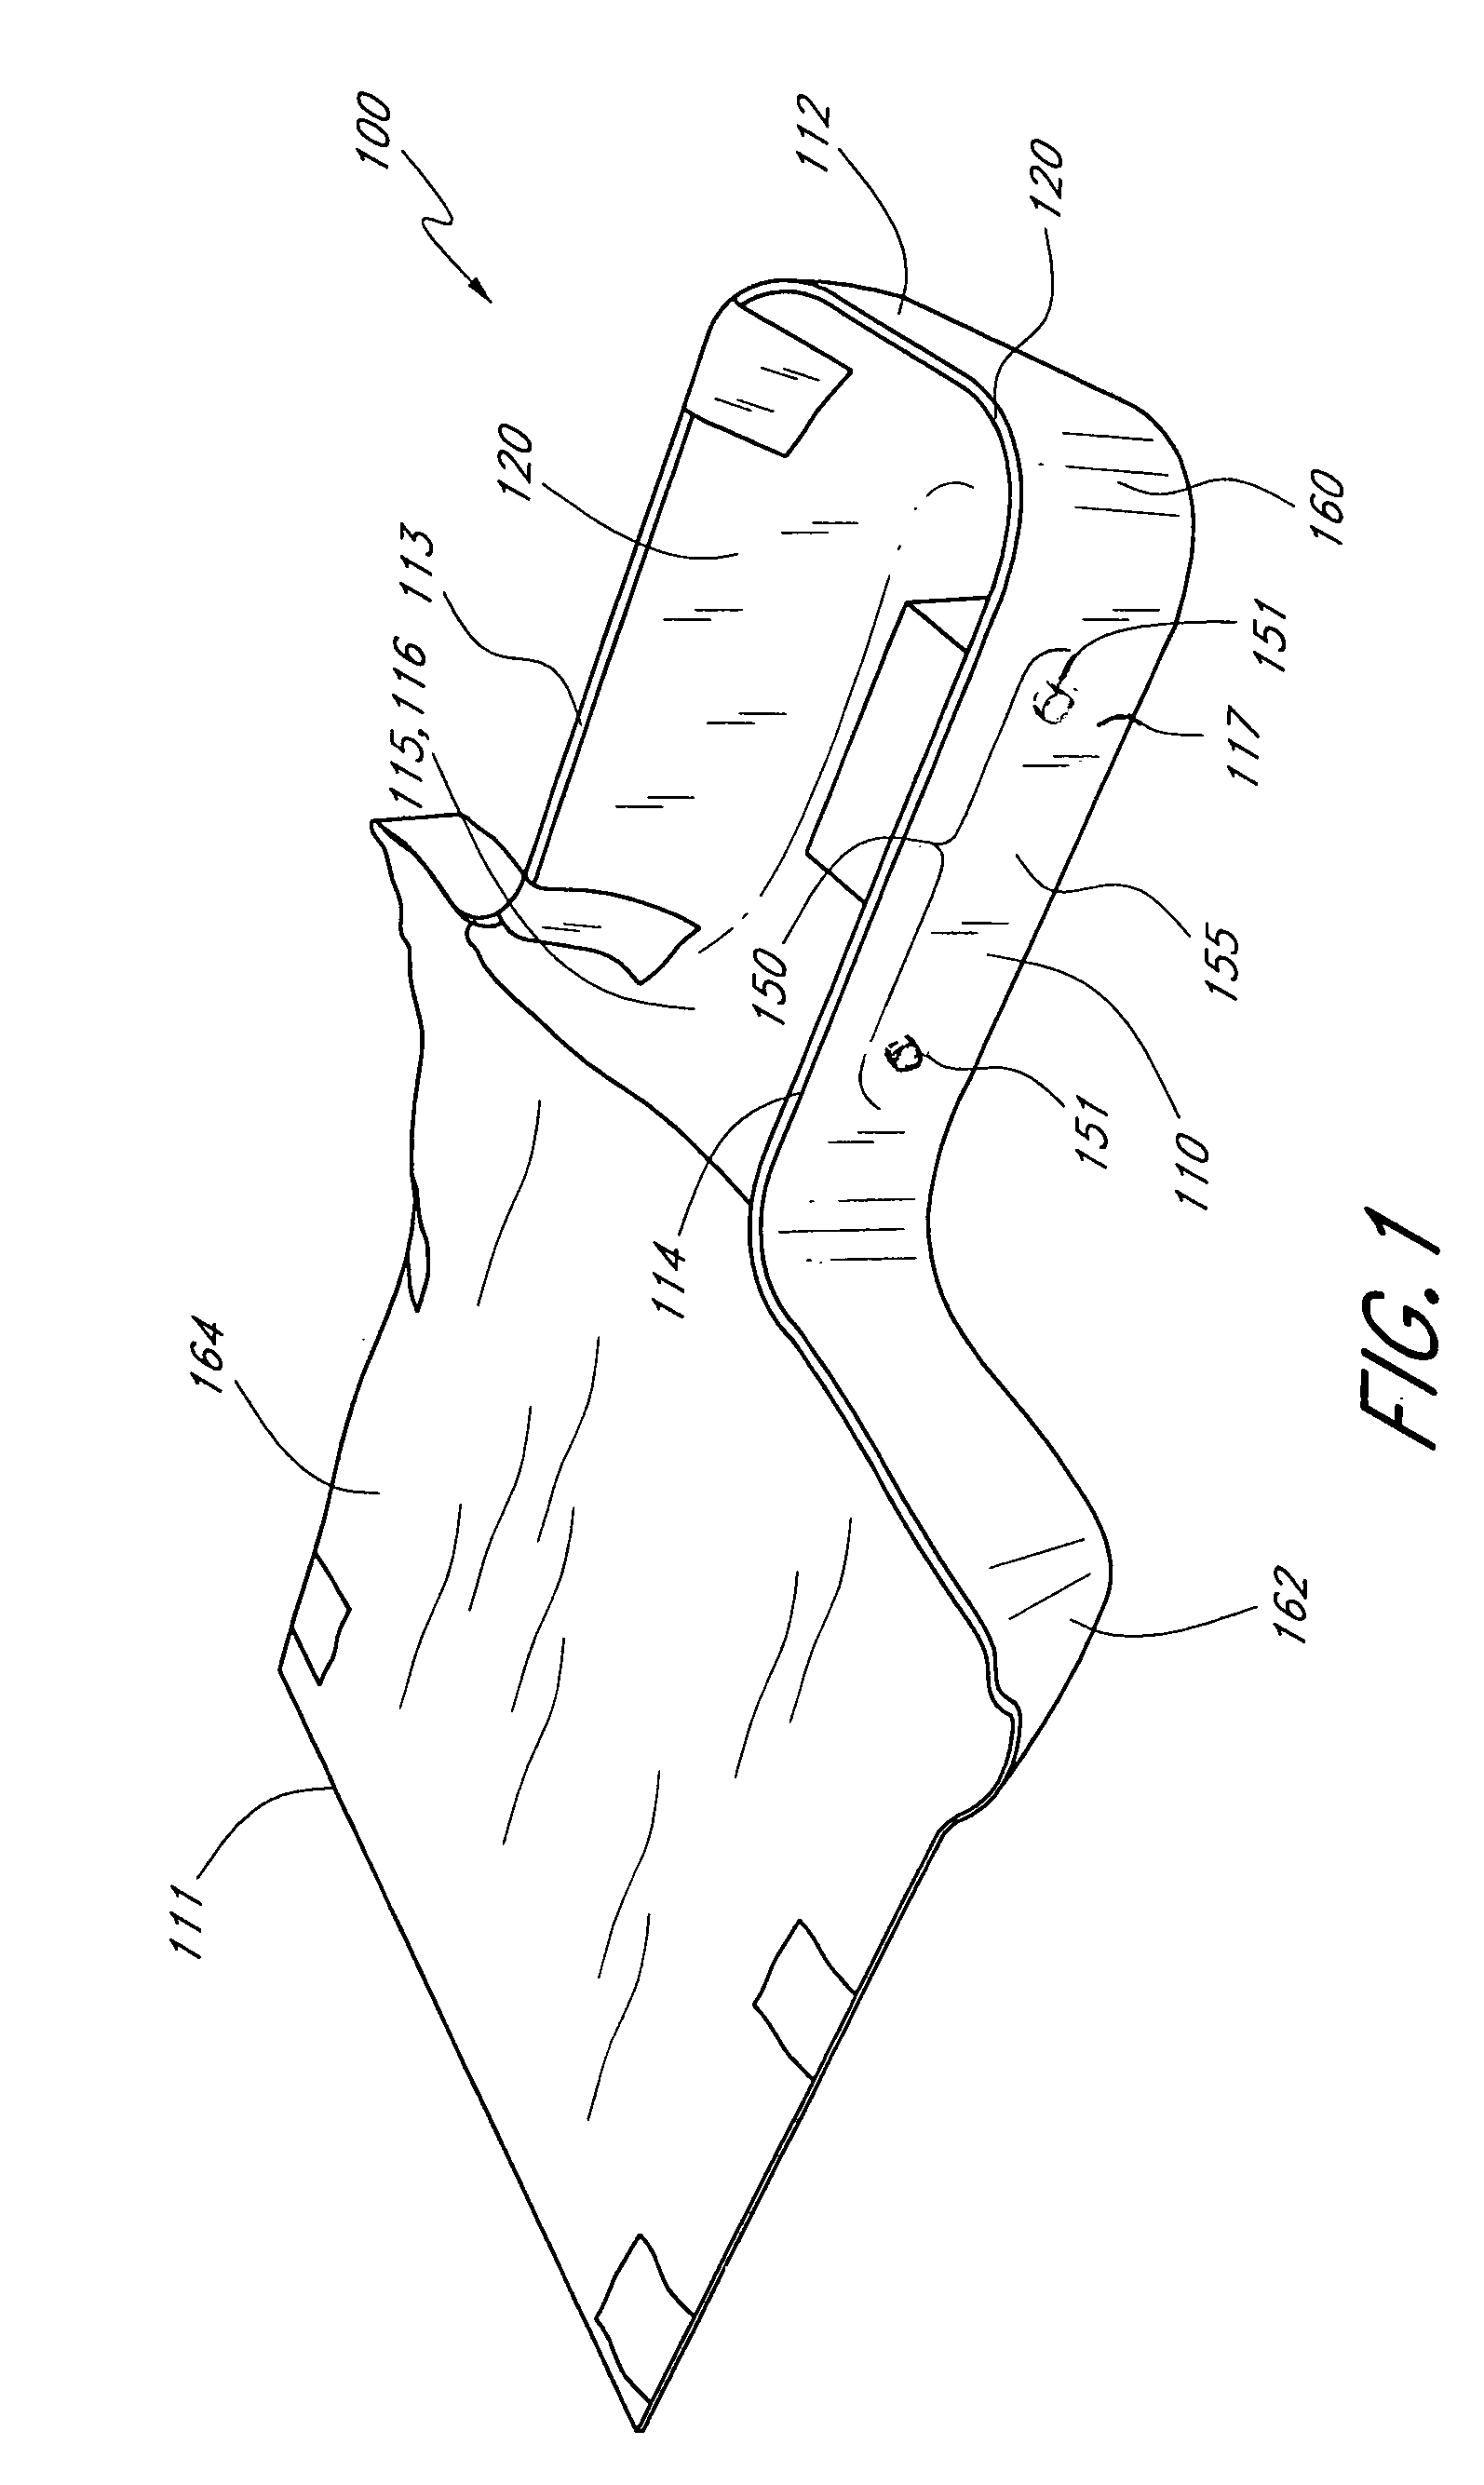 Method and device for registration and immobilization